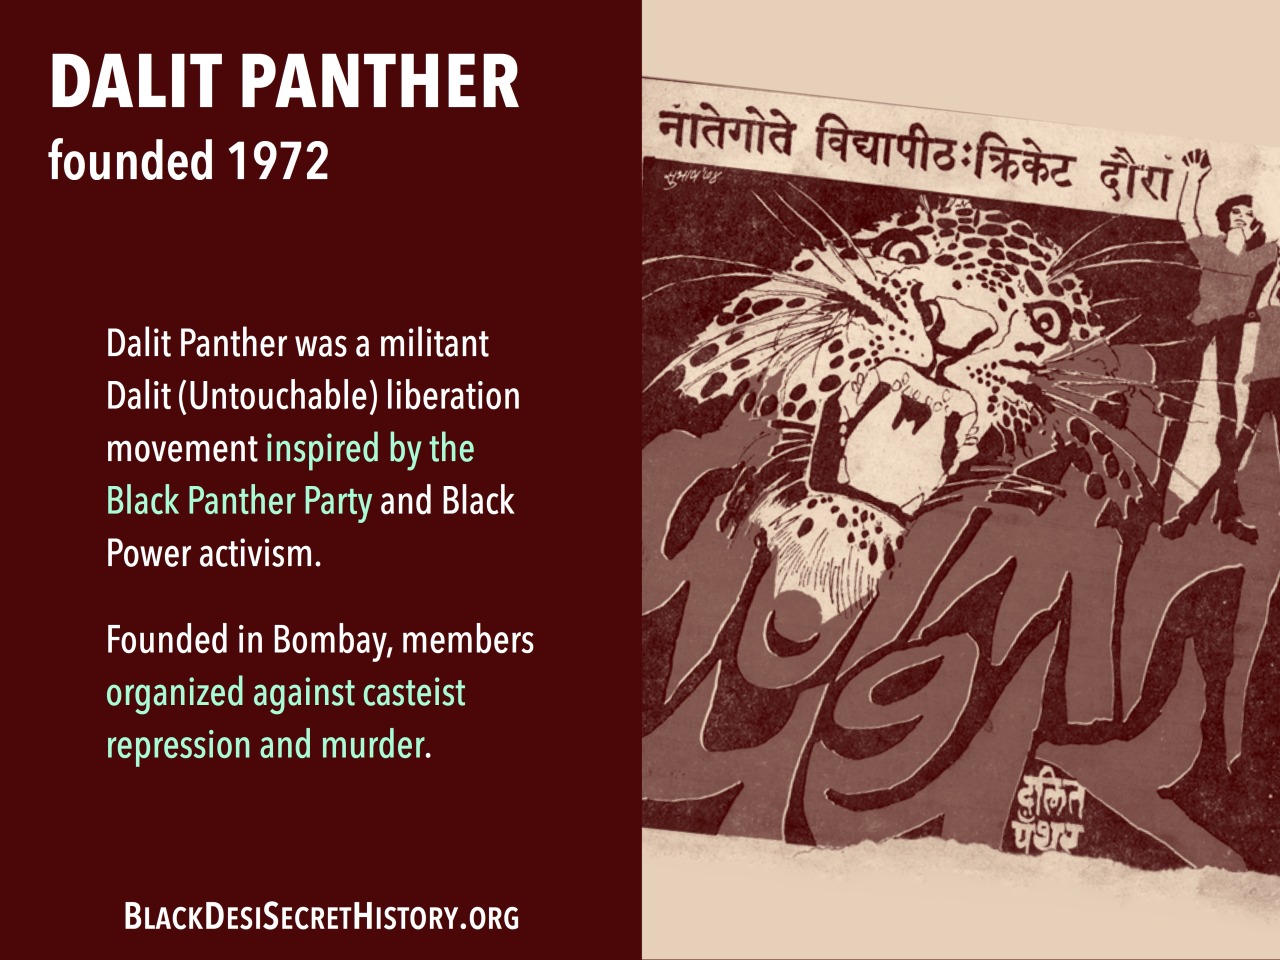 DALIT PANTHER, founded 1972: Dalit Panther was a militant Dalit (Untouchable) liberation movement inspired by the Black Panther Party and Black Power activism. Founded in Bombay, members organized against casteist repression and murder.